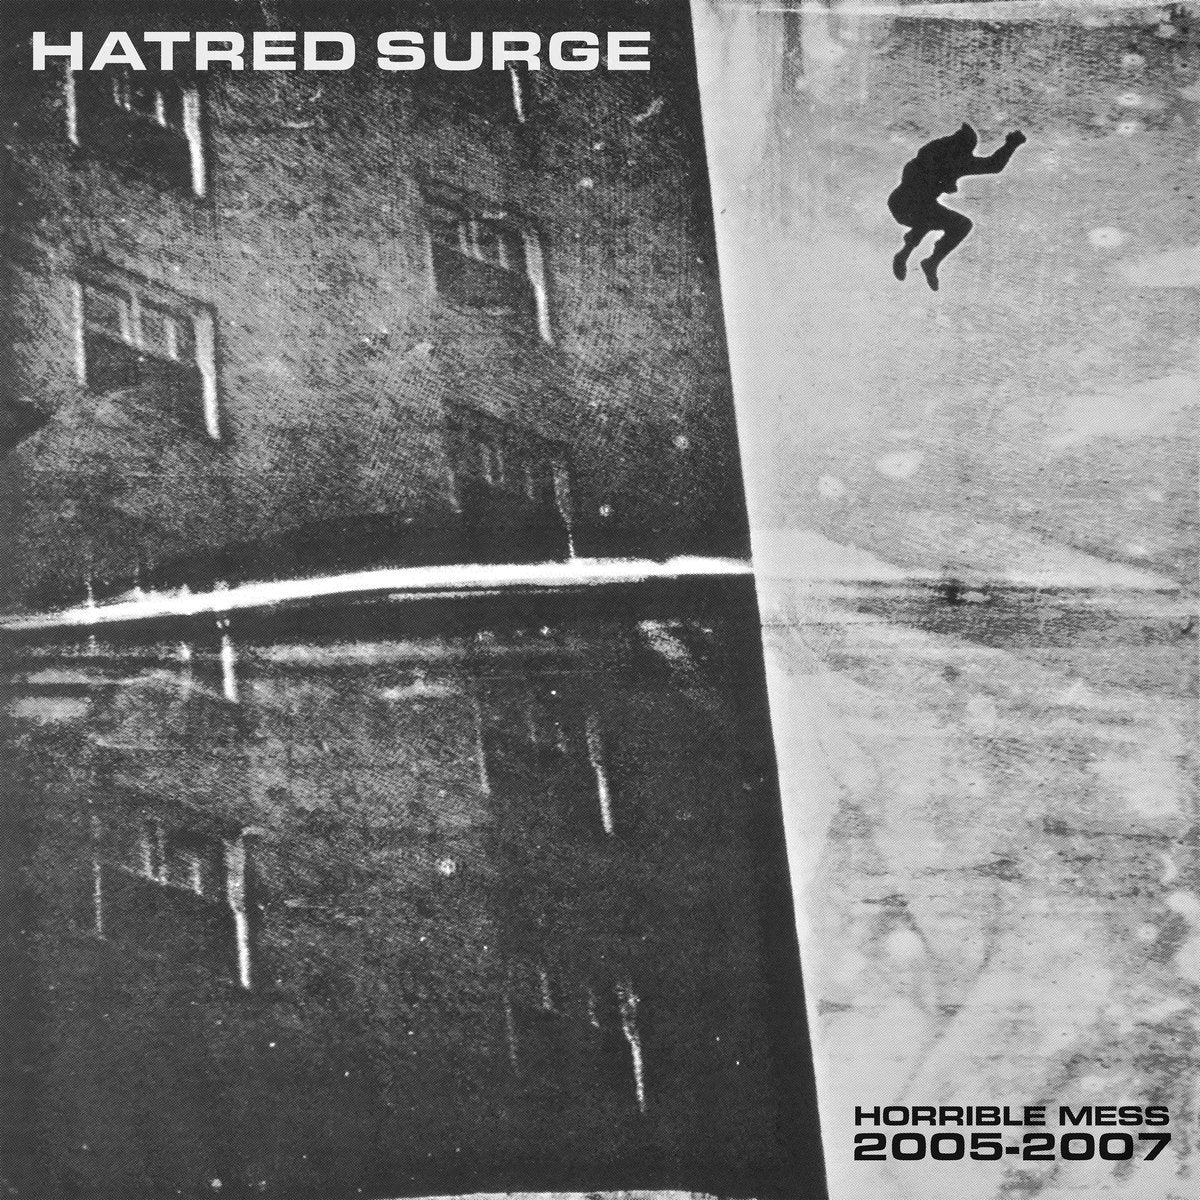 Hatred Surge - "Horrible Mess 2005 to 2007" LP